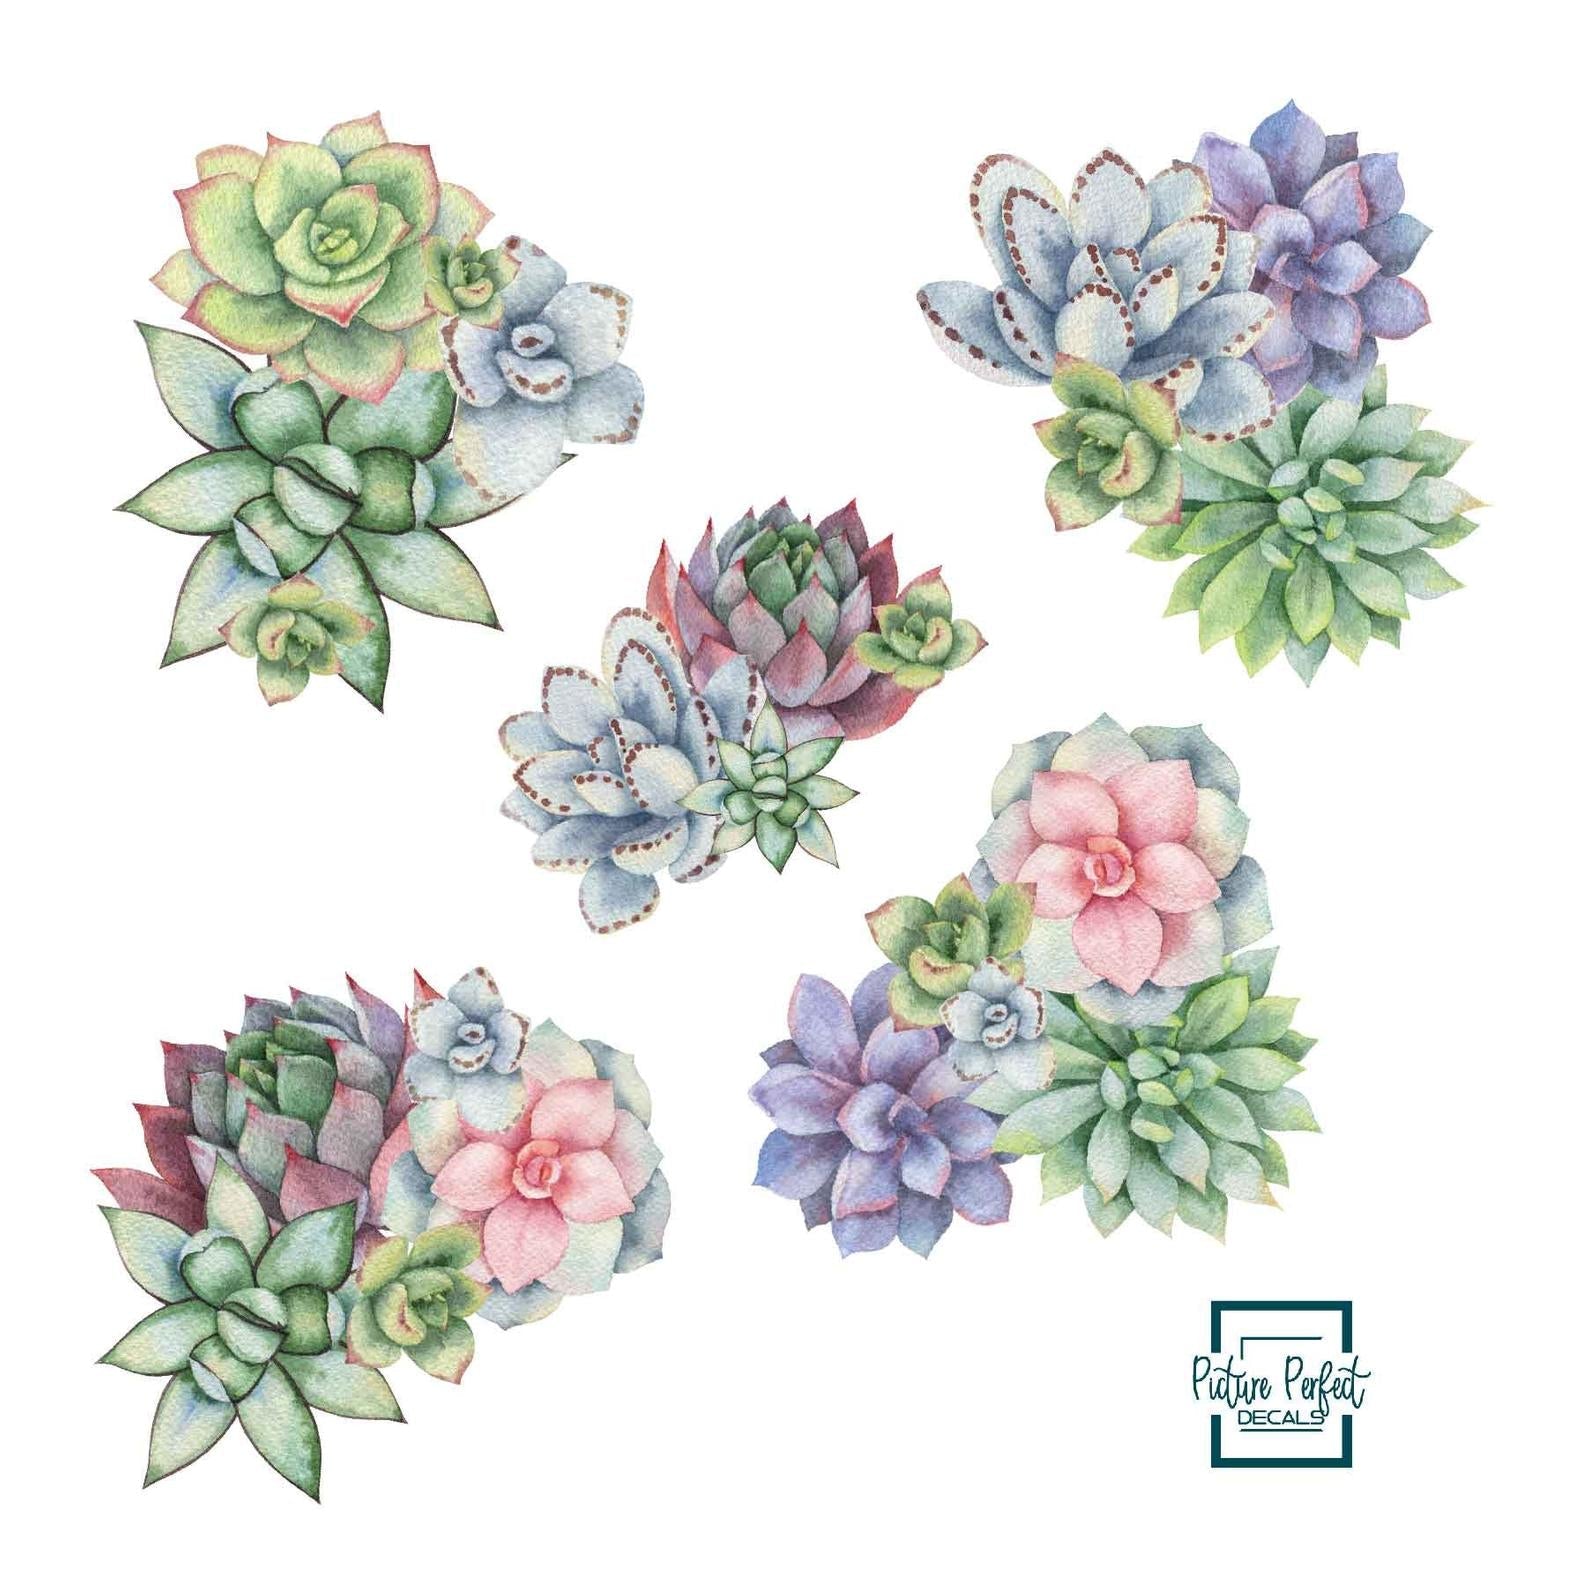 Succulents Wall Decals | Succulent Bouquet Wall Stickers - Picture Perfect Decals